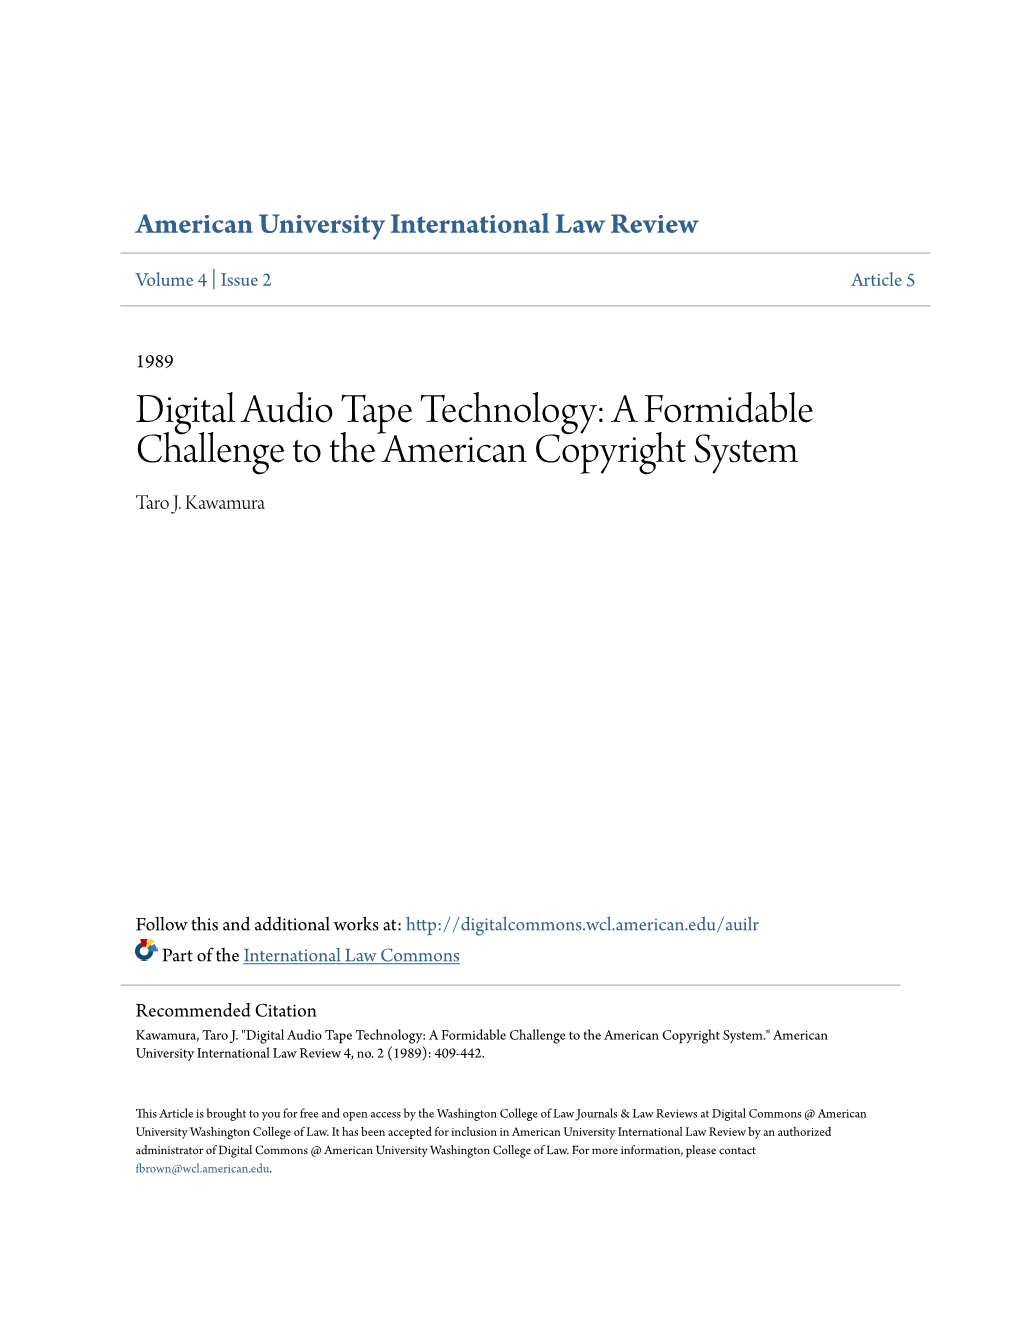 Digital Audio Tape Technology: a Formidable Challenge to the American Copyright System Taro J